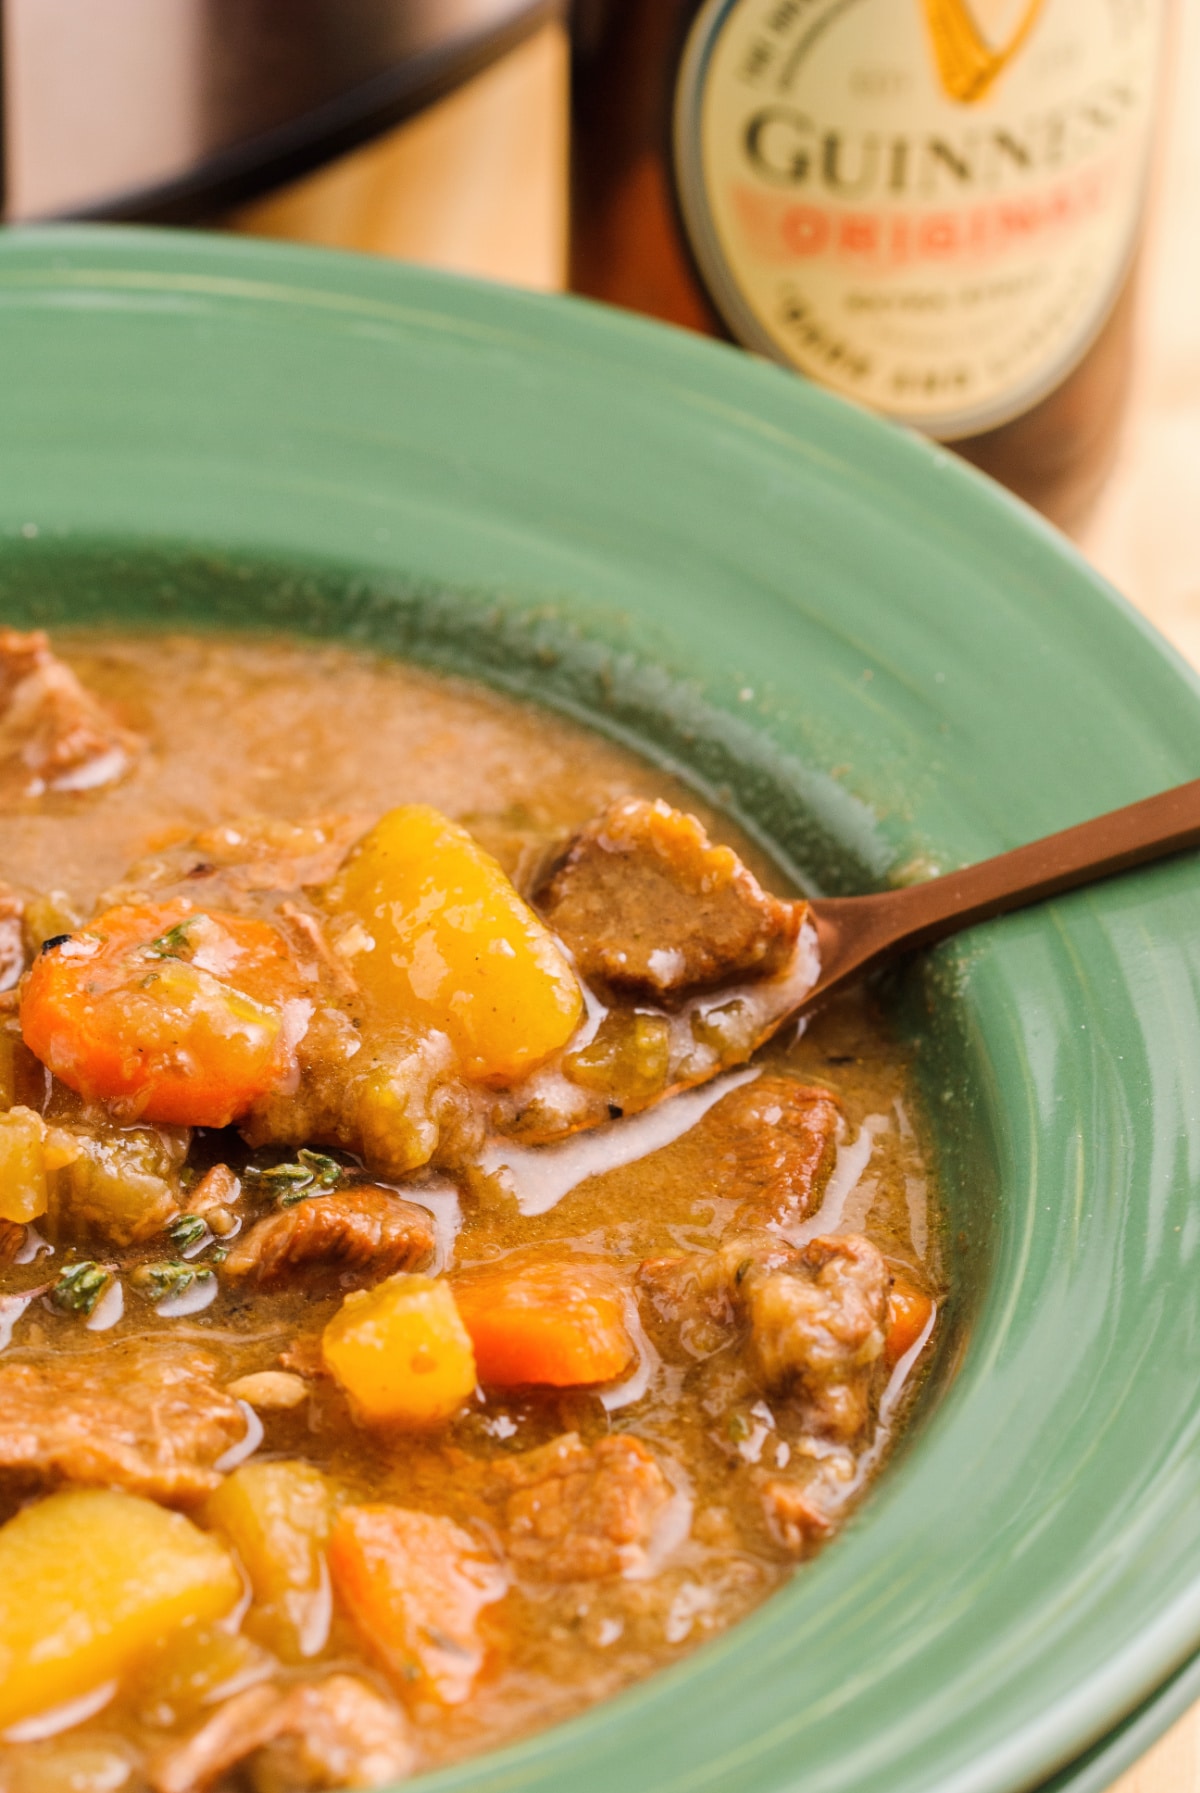 Slow cooker Guinness beef stew